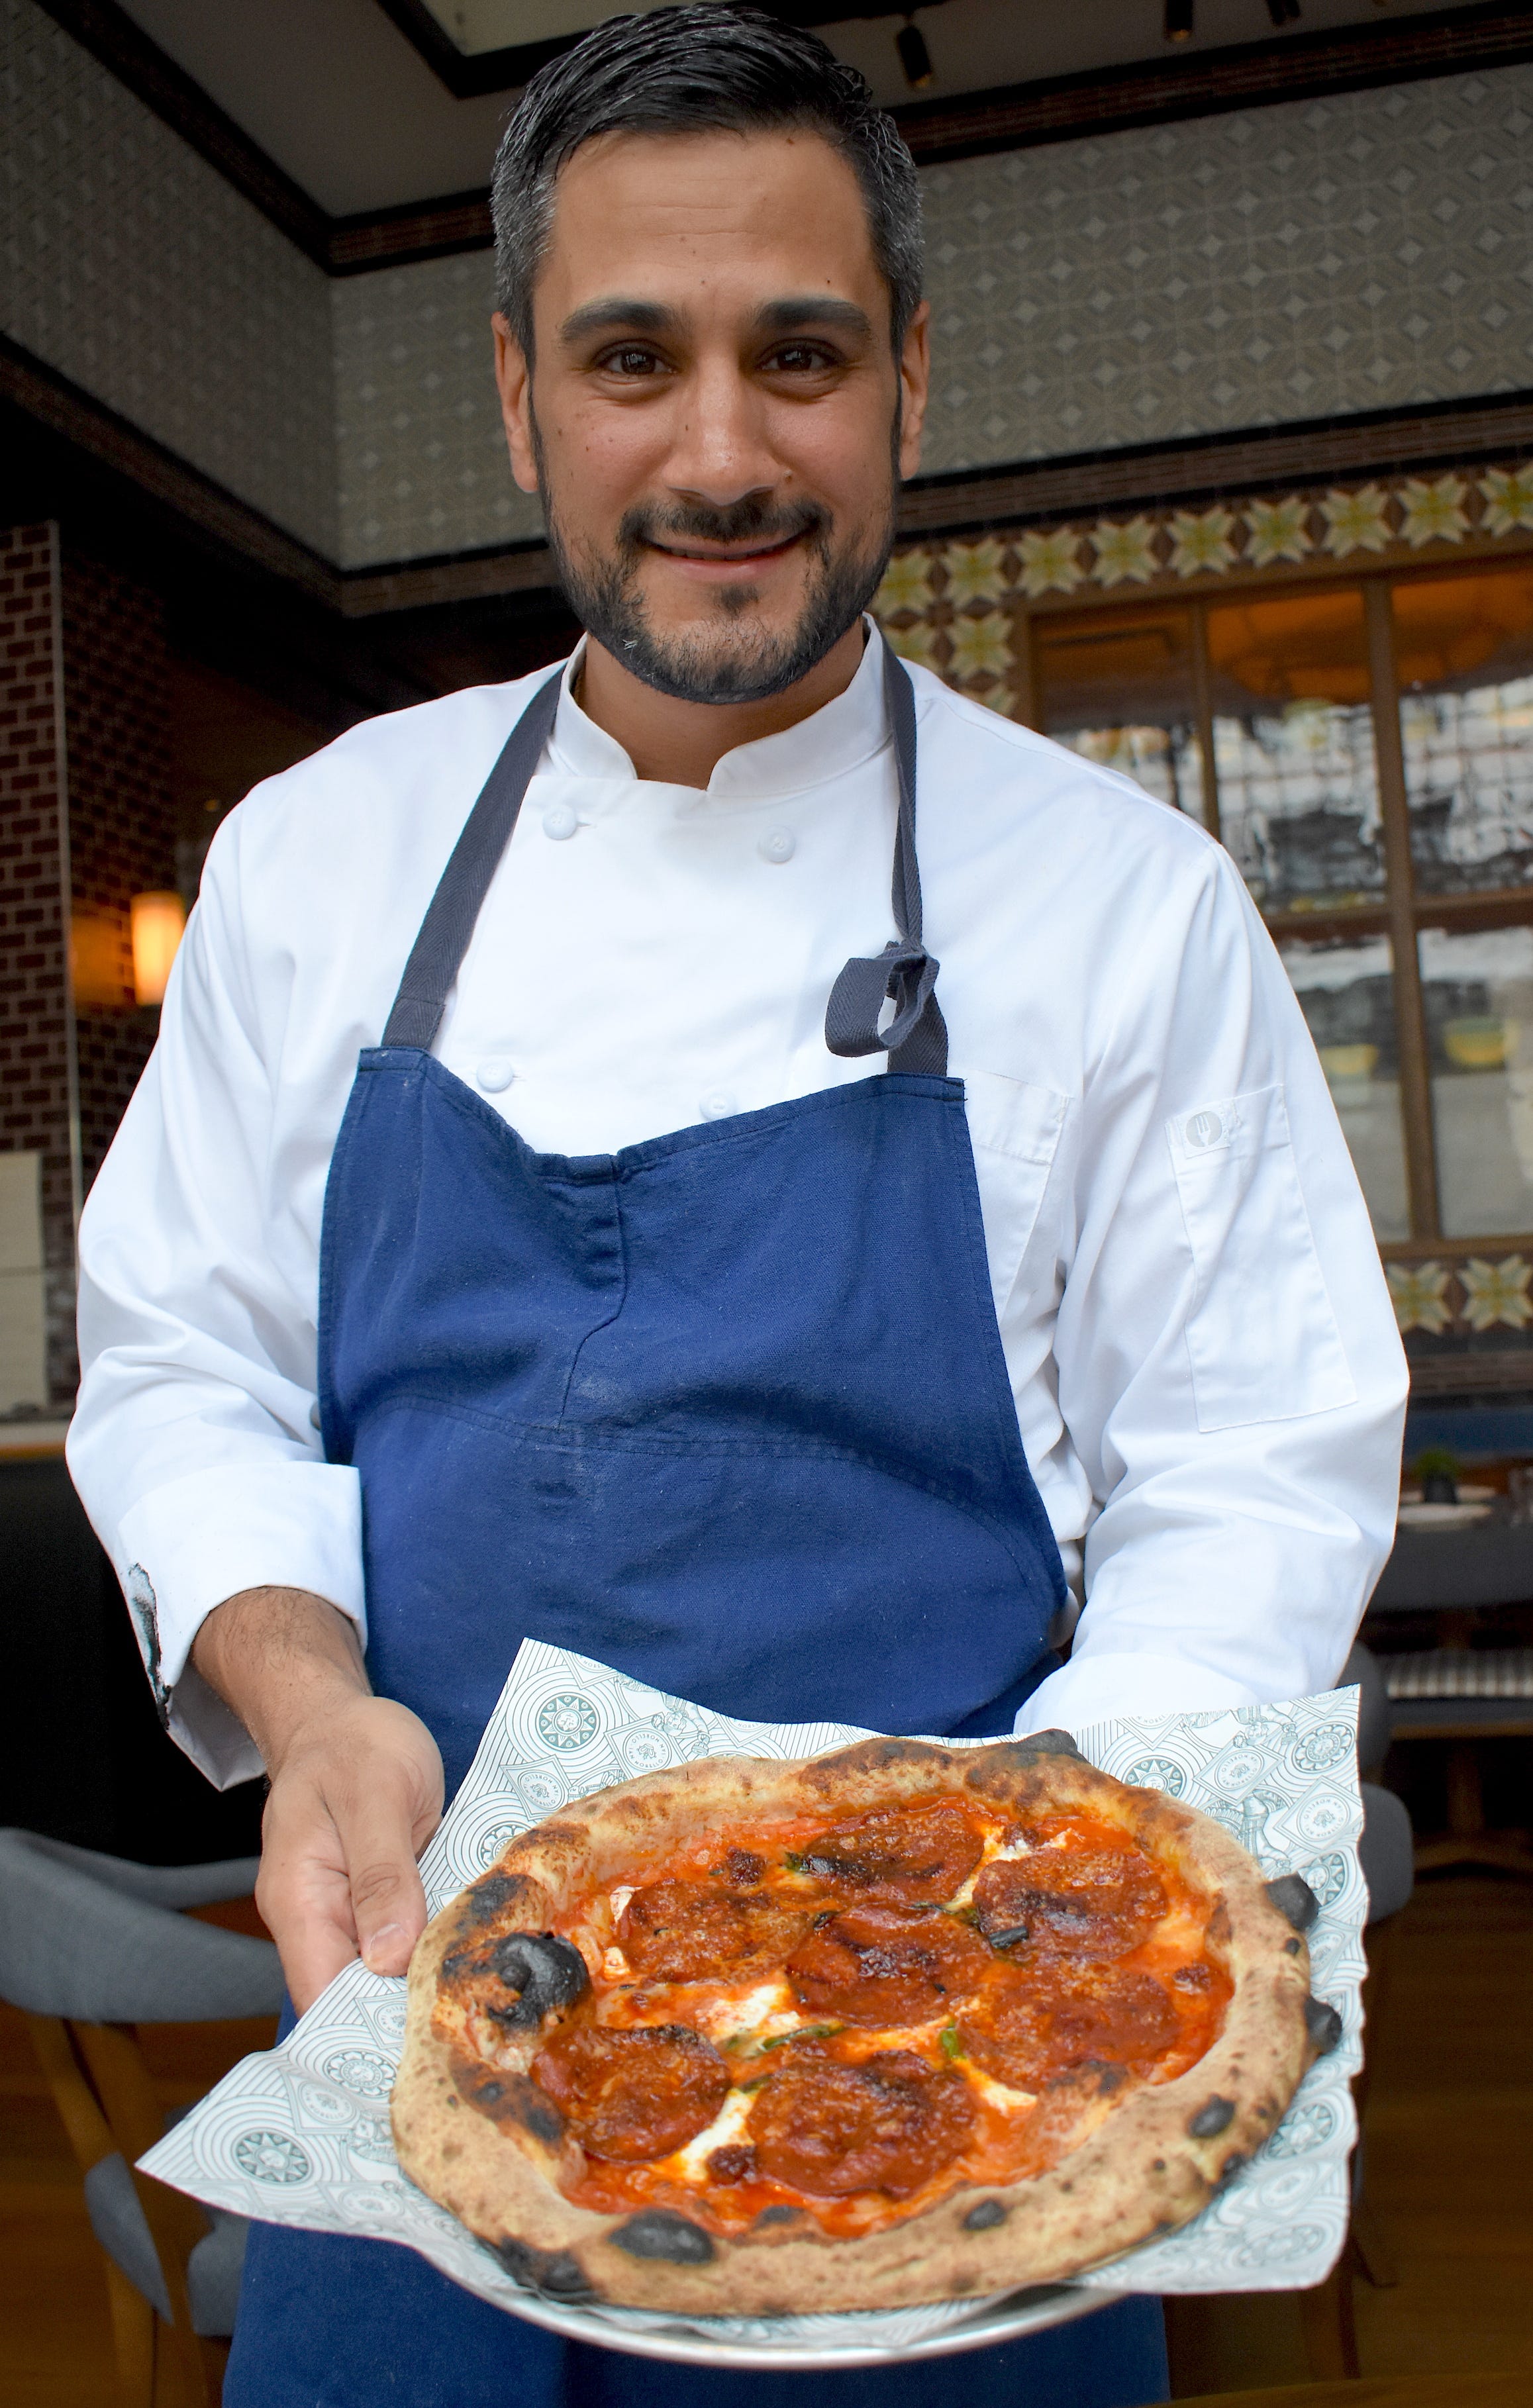 Chef de cuisine Cory Barberio shows off an " OG " pie, hot out of the wood-fired oven. The pizza is topped with pepperoni, ' nduja, and Fresno chilies.